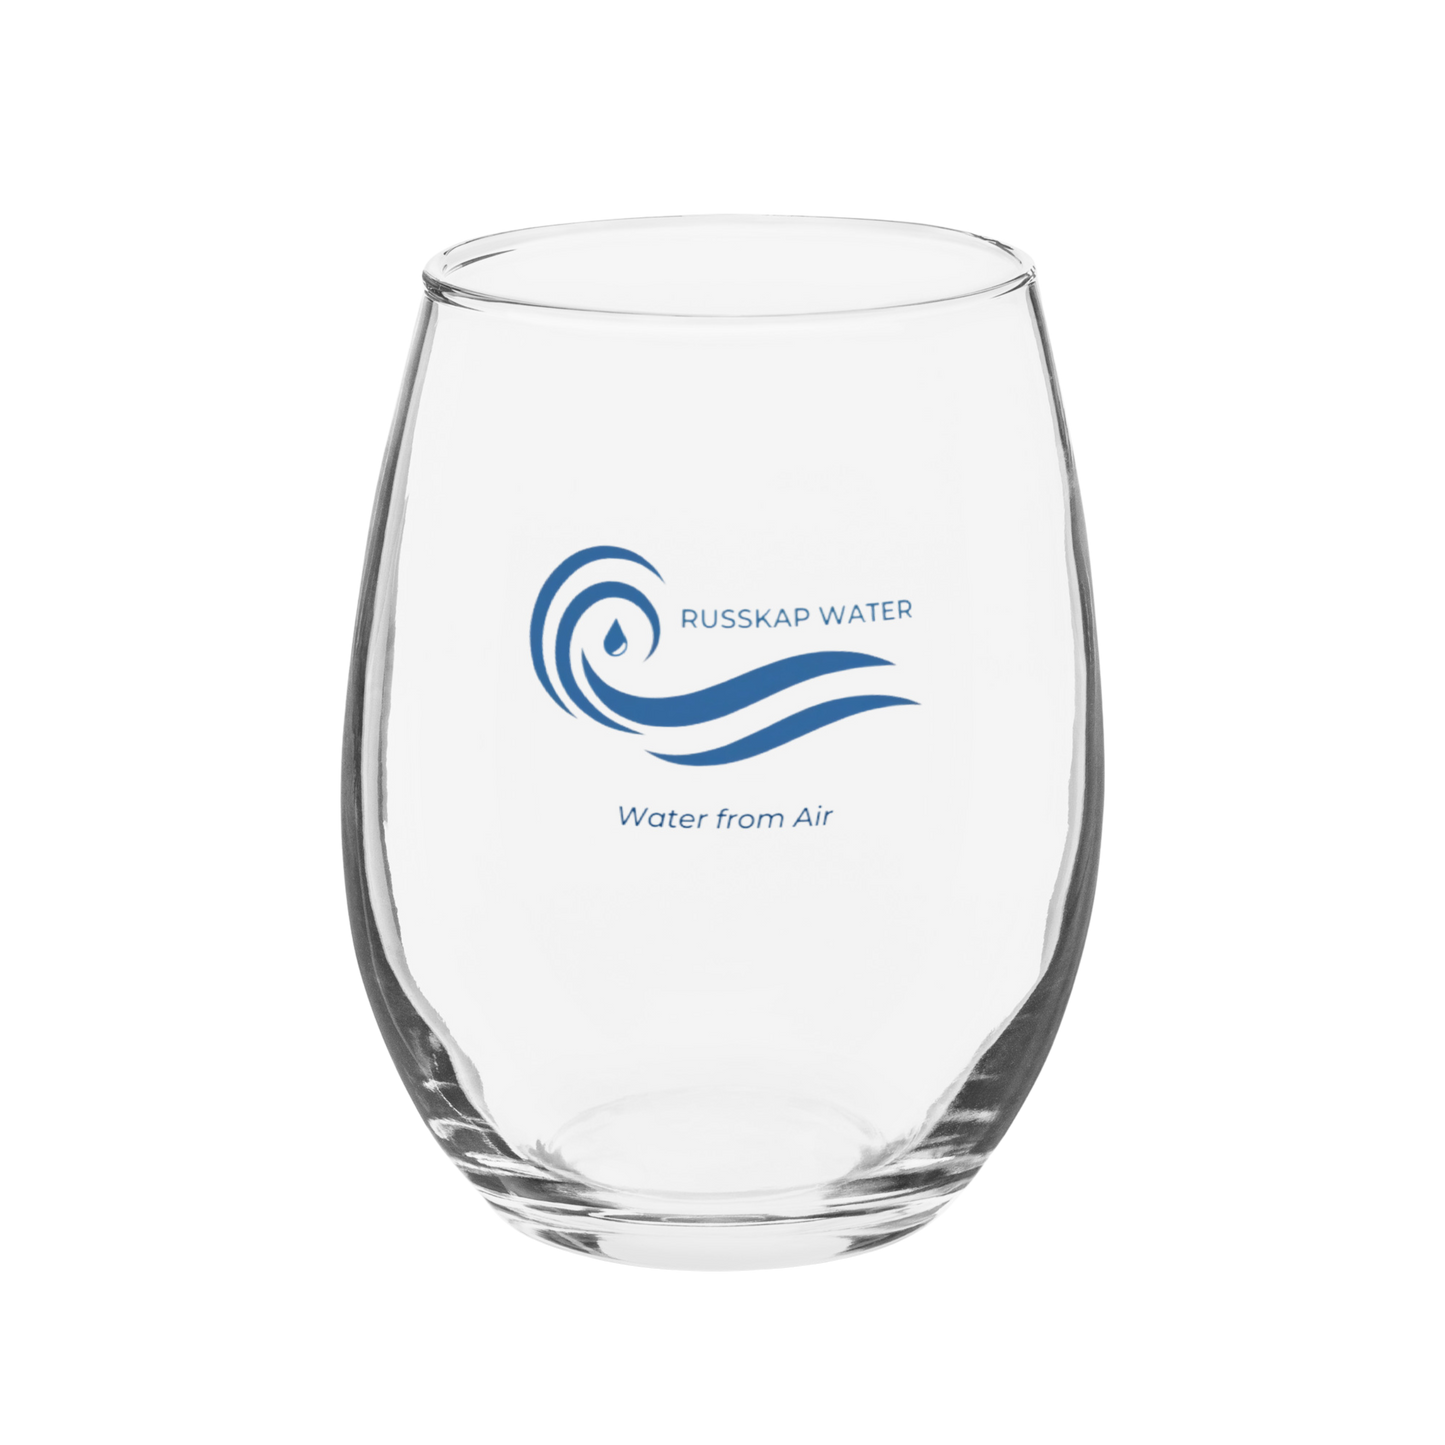 RussKap 'Water from Air' Rounded Drinking Glass